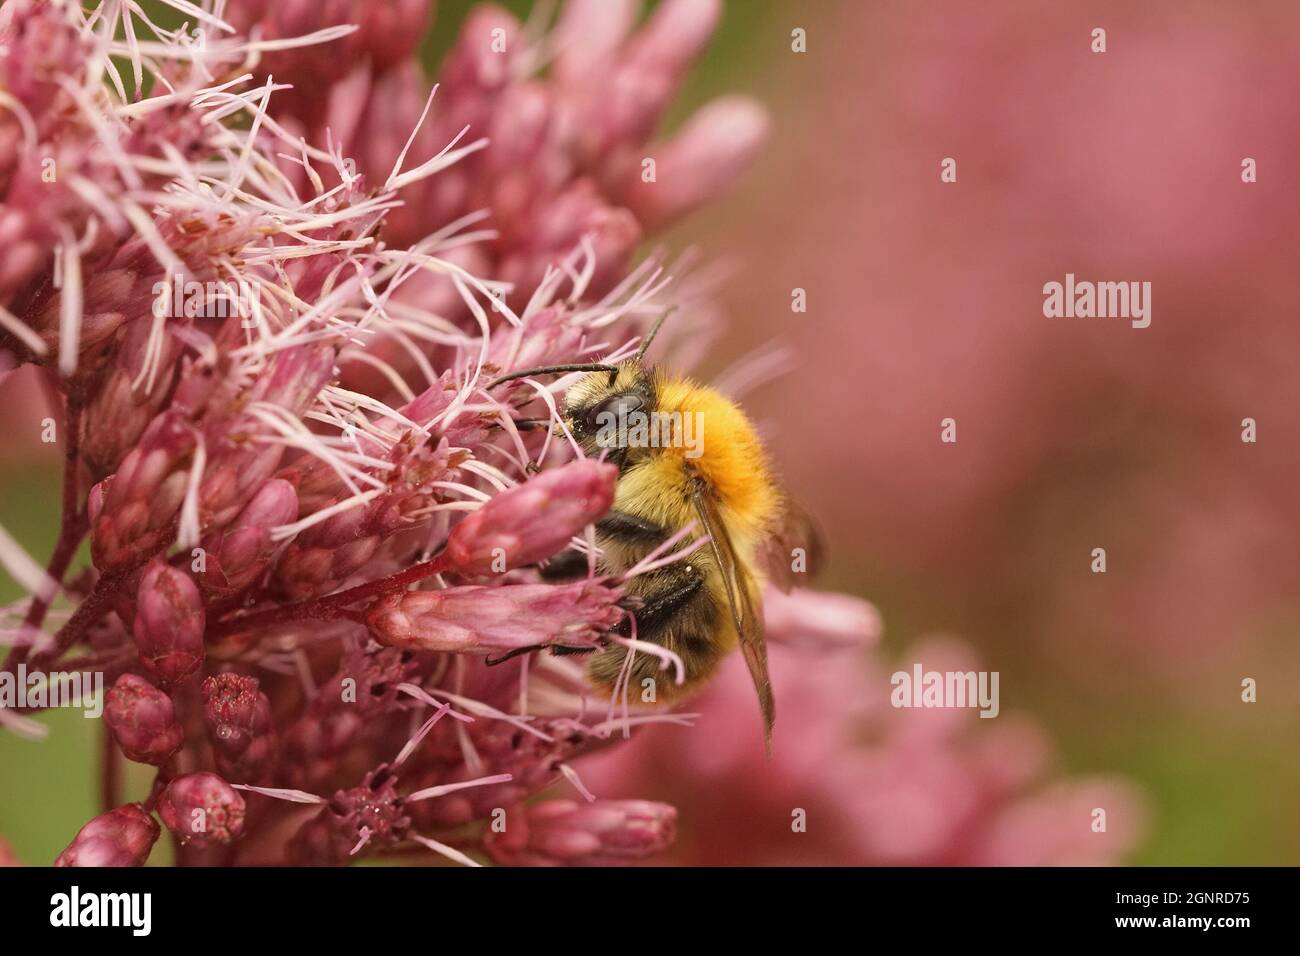 Colorful closeup of a worker common carder bee, Bombus pascuorum Stock Photo